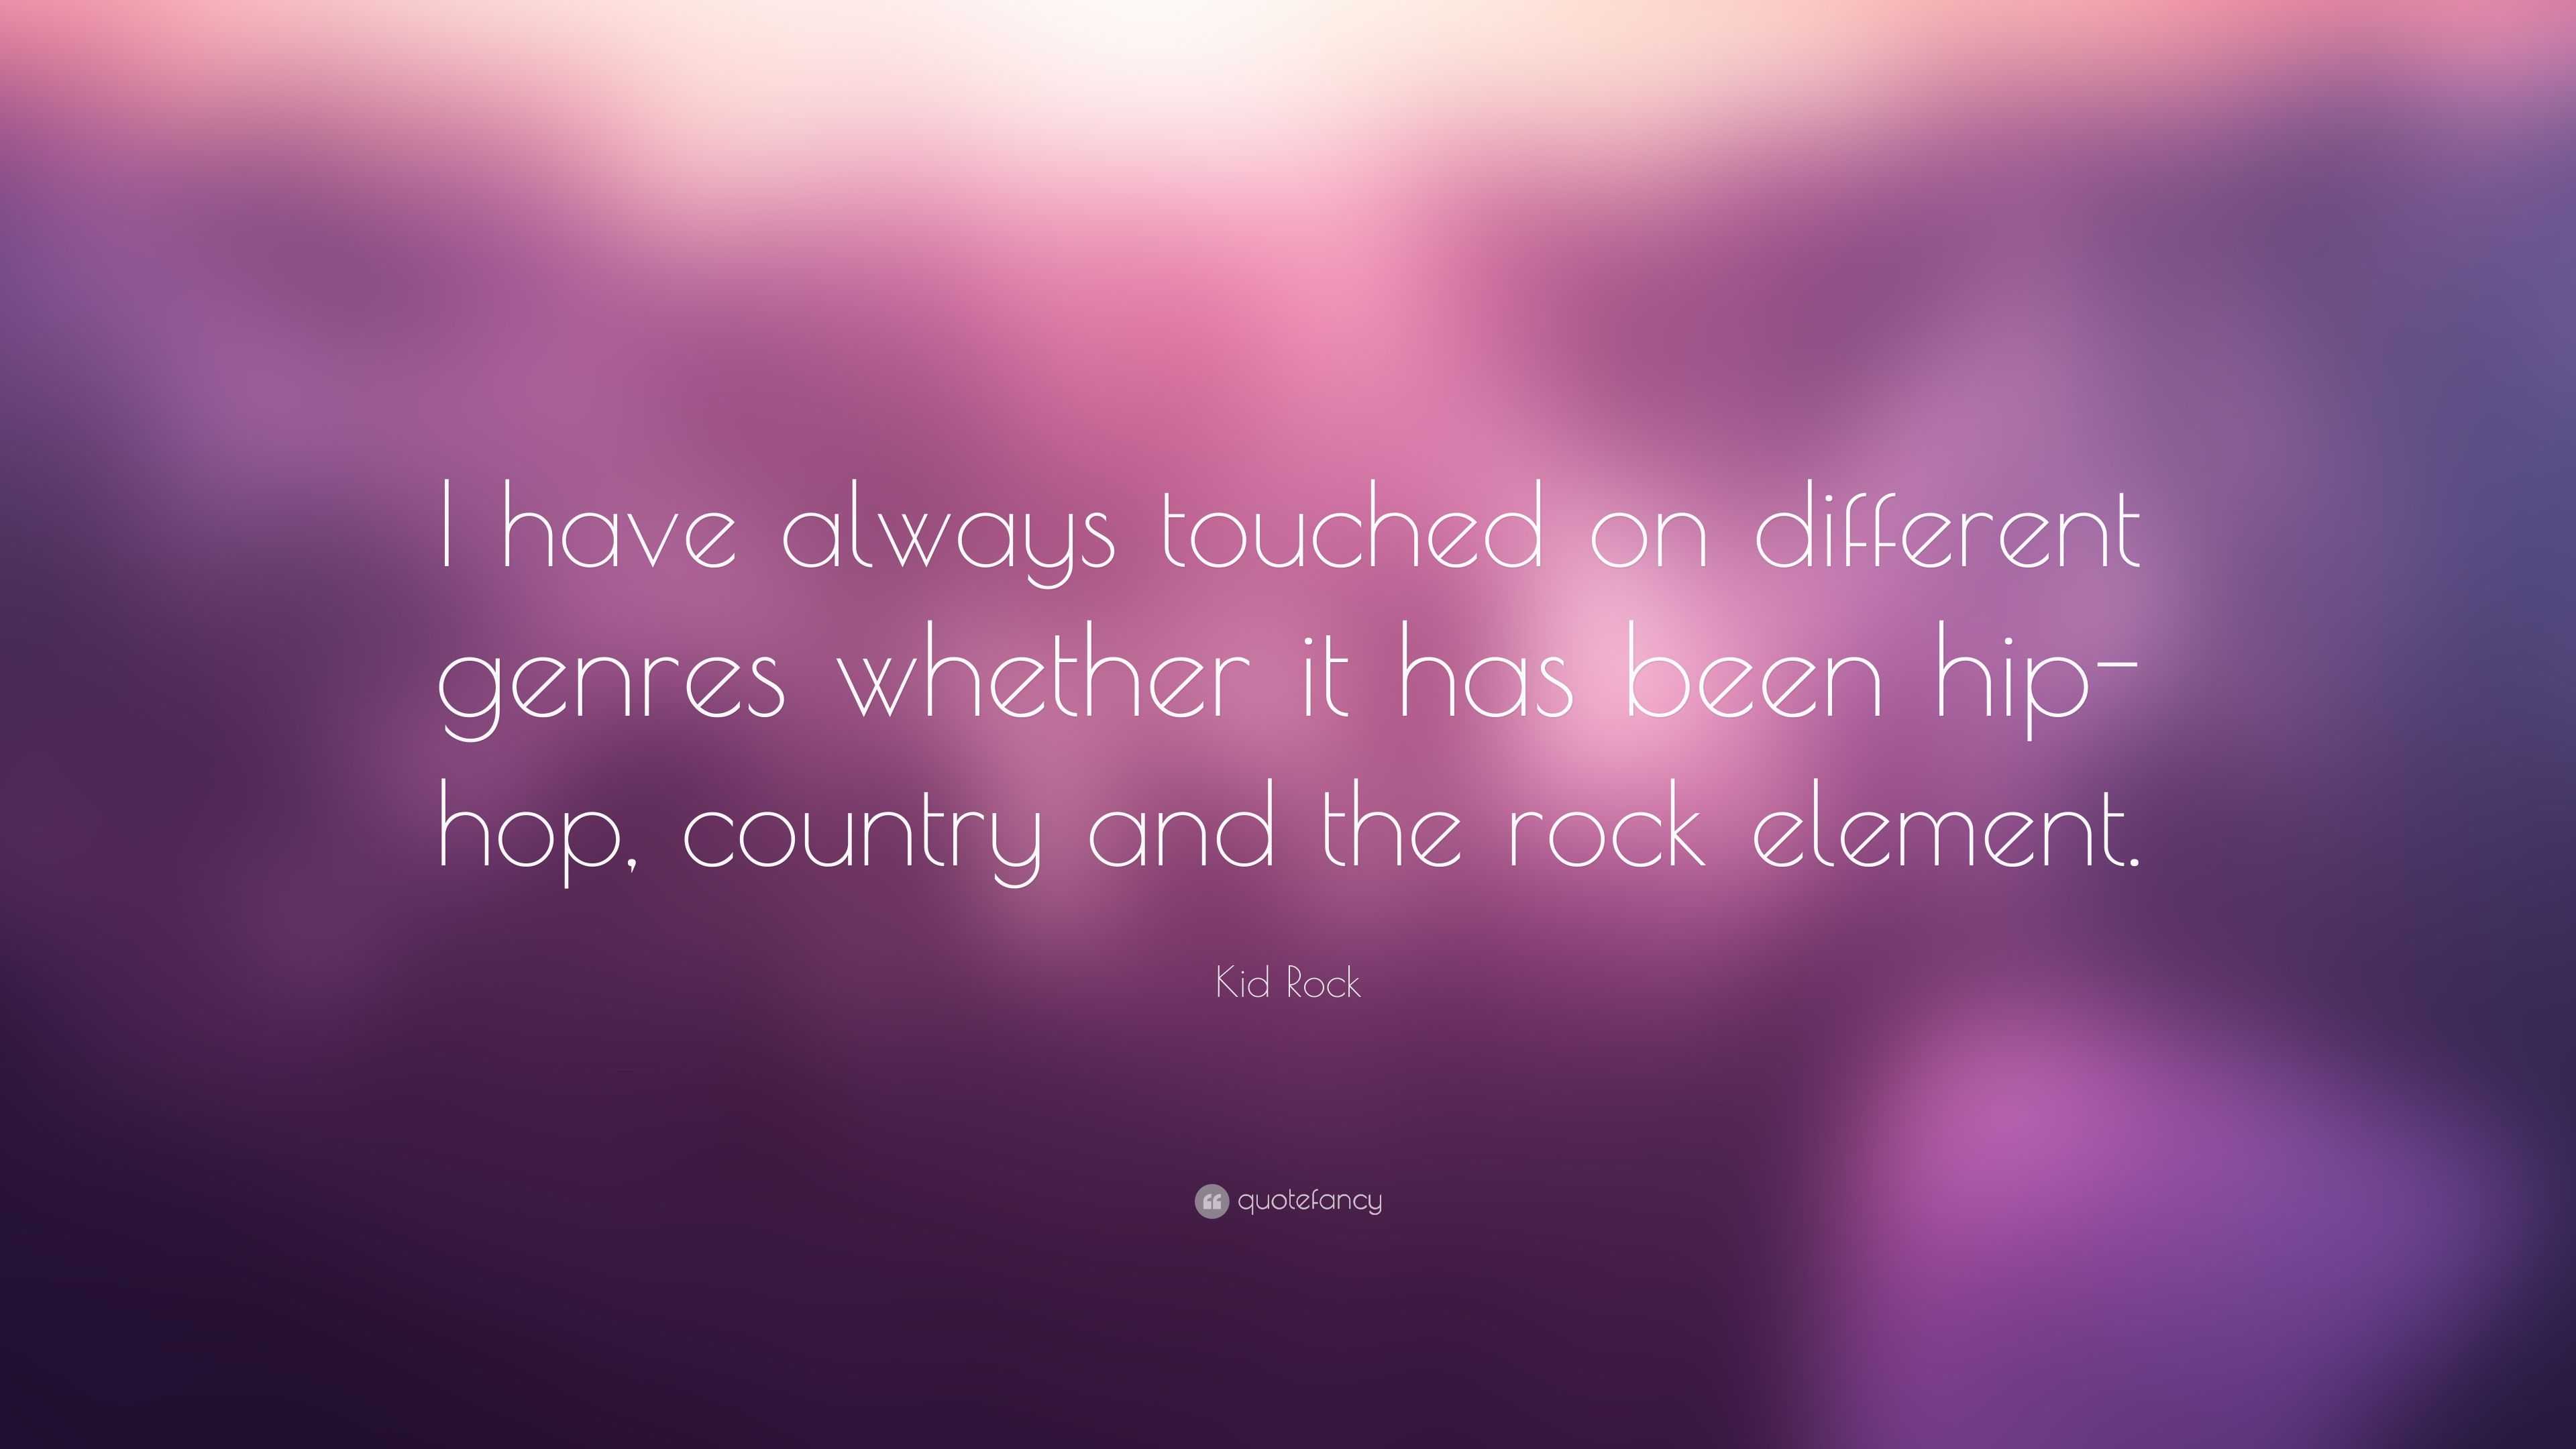 Kid Rock Quote: “I have always touched on different genres whether it ...